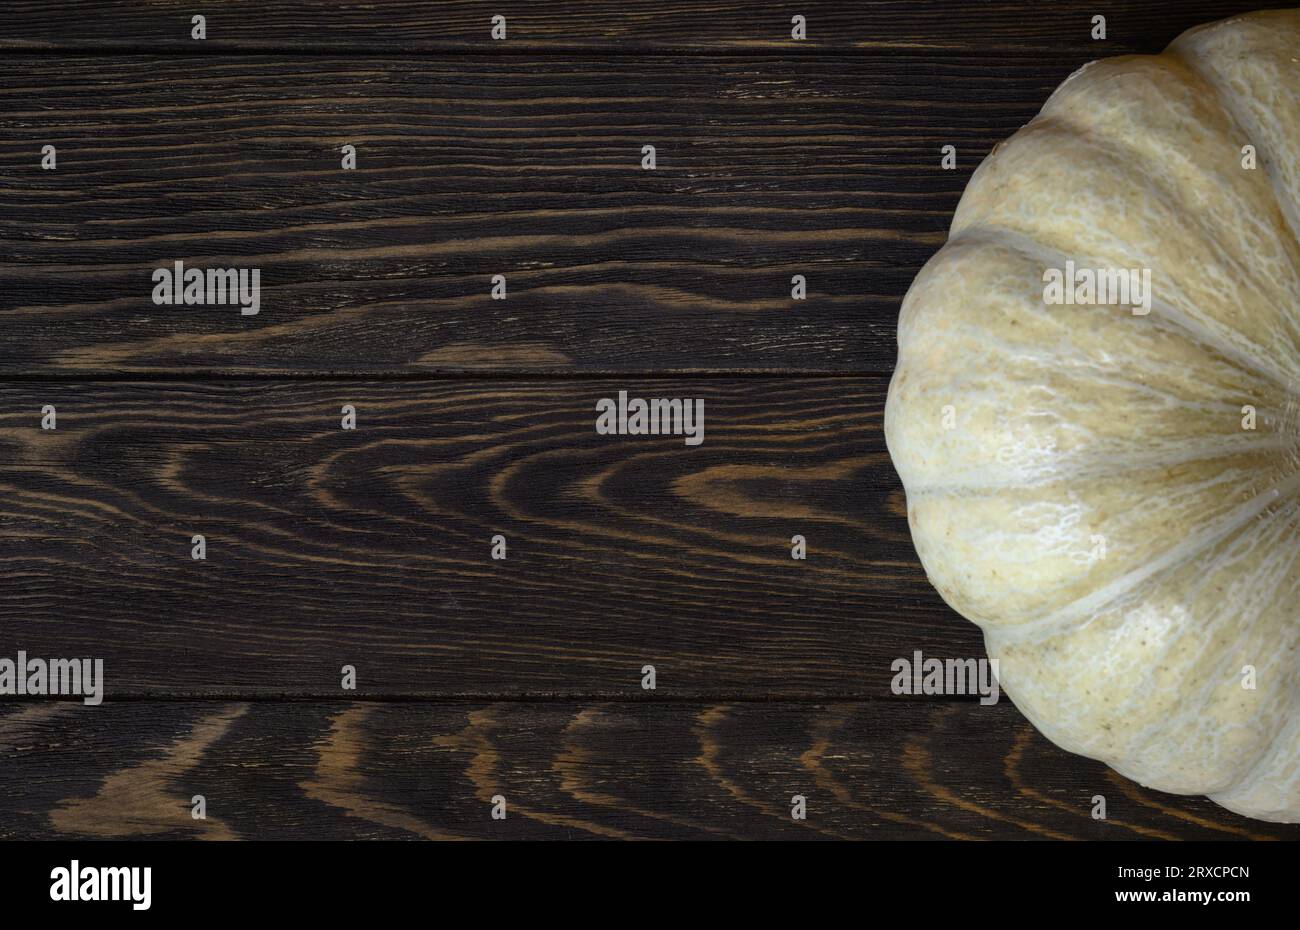 Vintage wood texture background for Halloween theme, top view. Dark brown wooden planks and white pumpkin, ripe vegetable. Hallowen, thanksgiving, foo Stock Photo